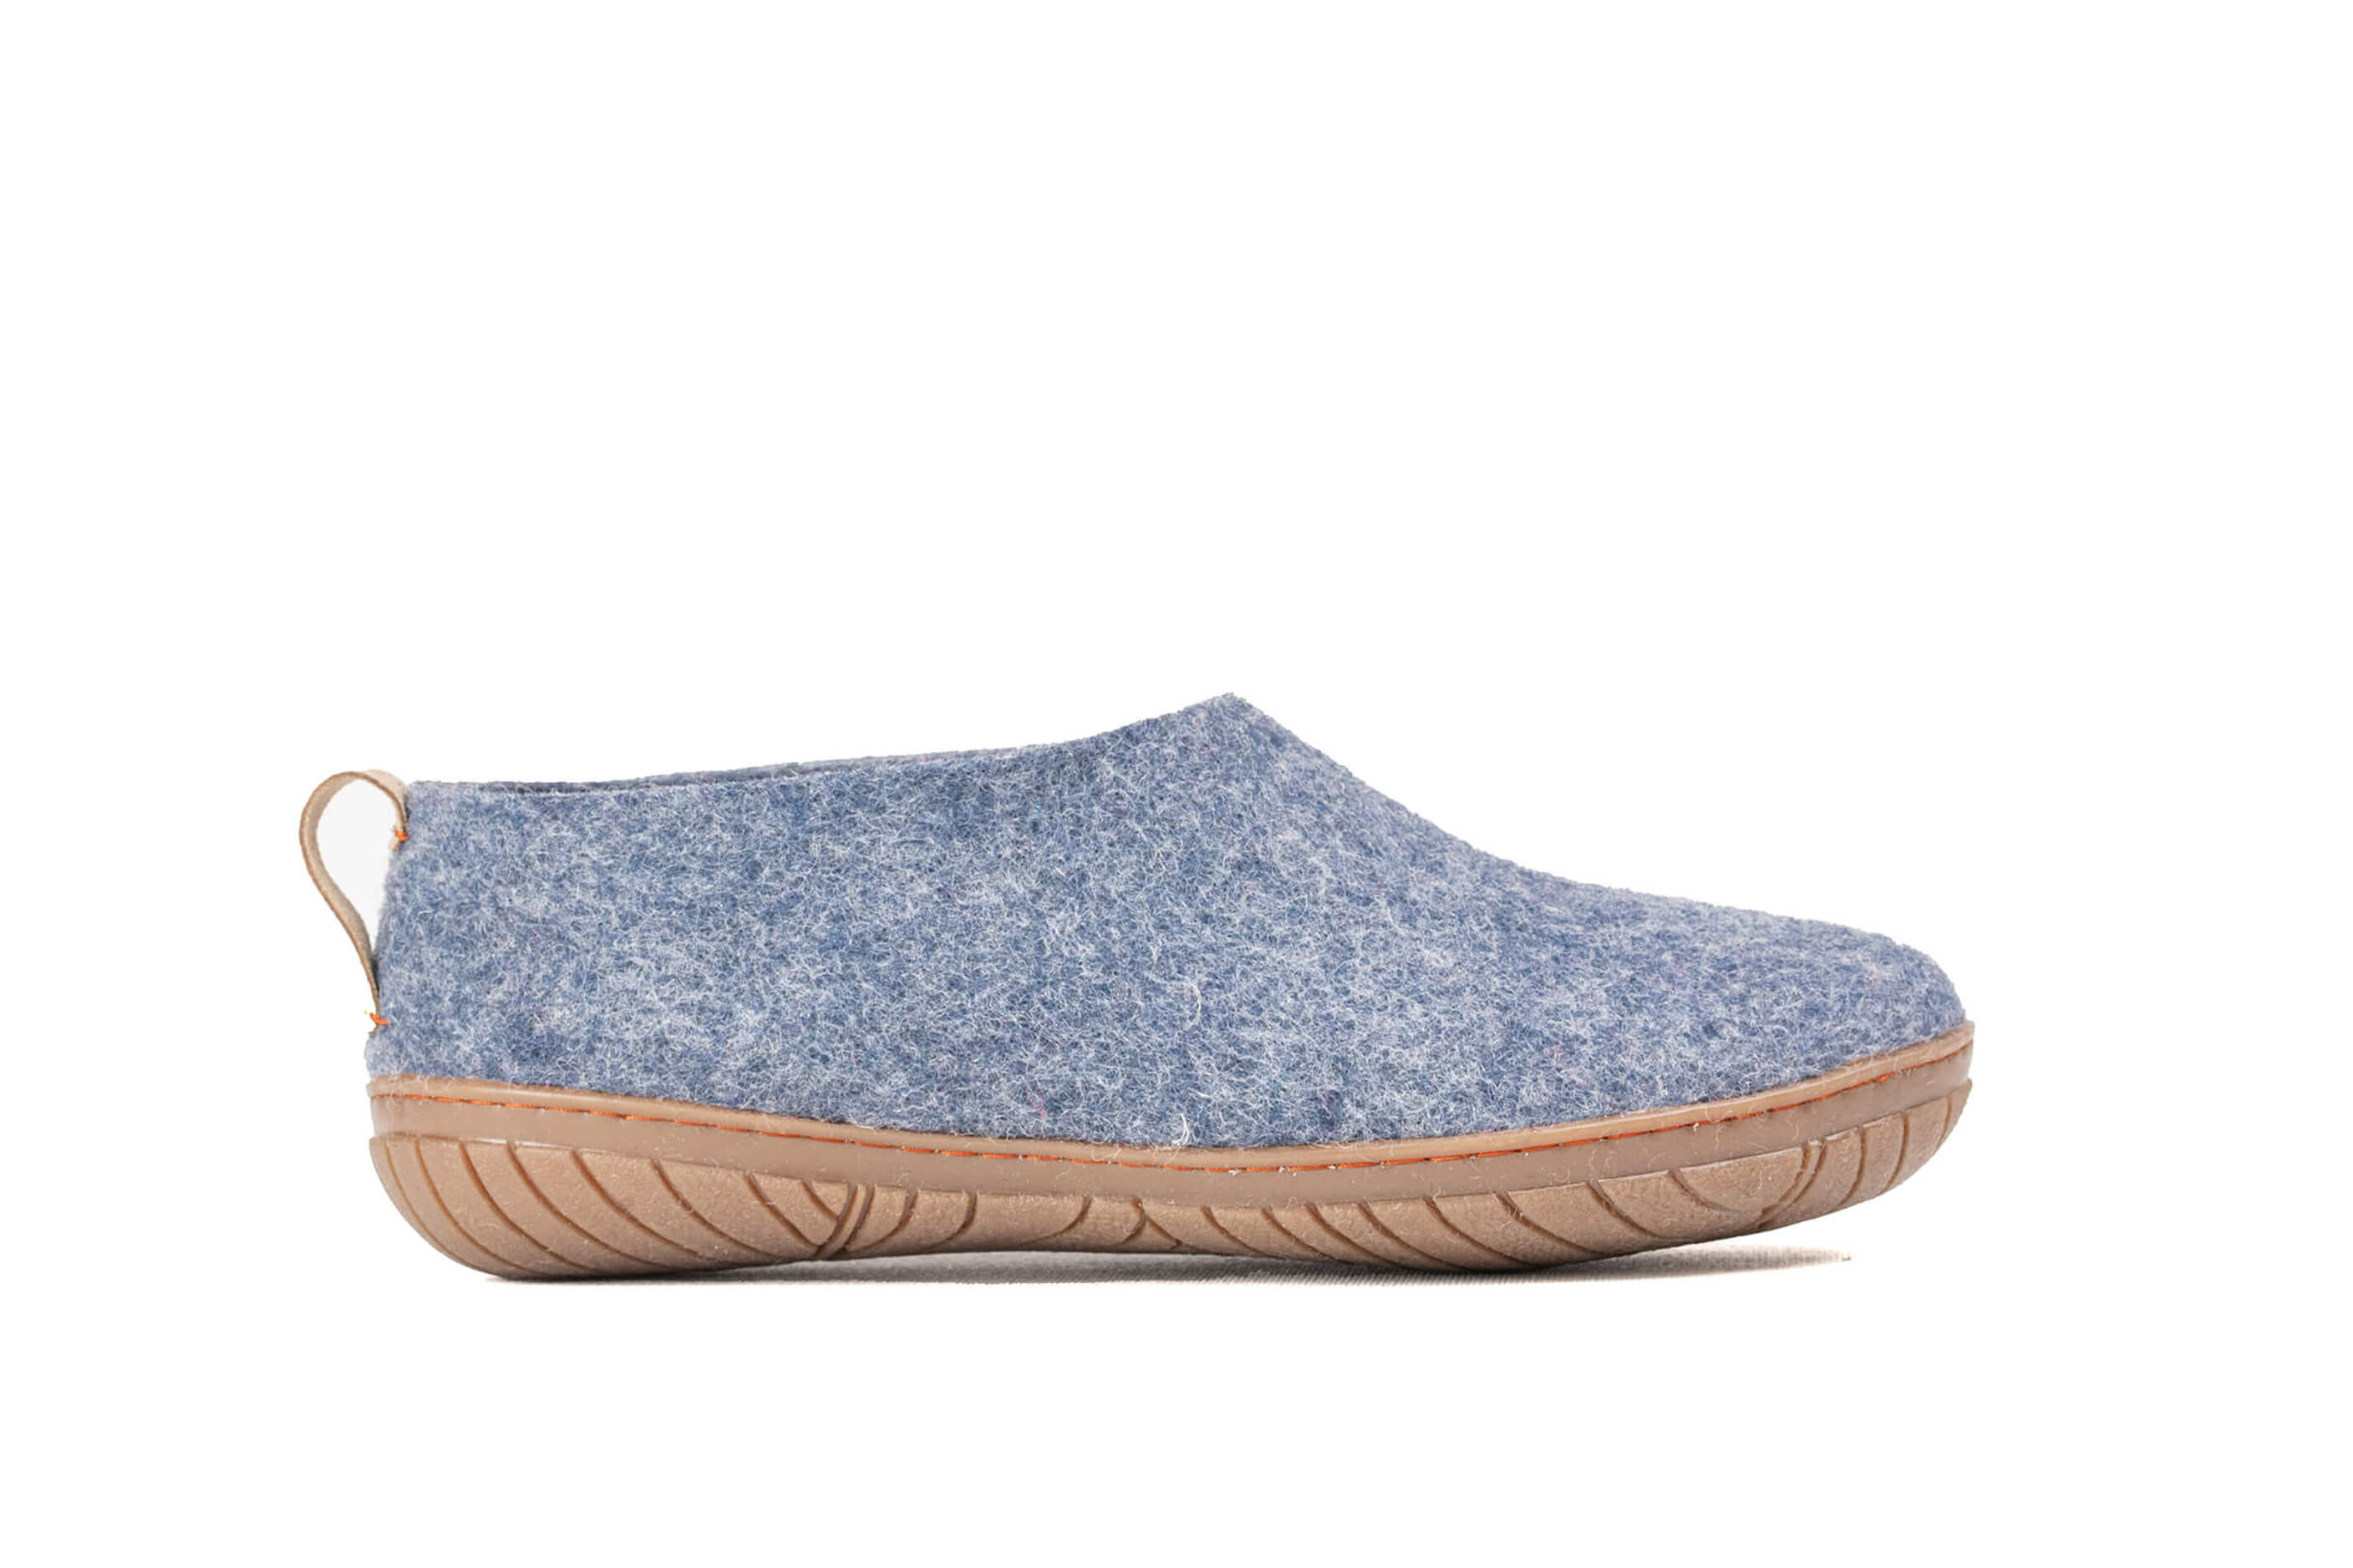 Outdoor Felt Shoes With Rubber Sole - Denim